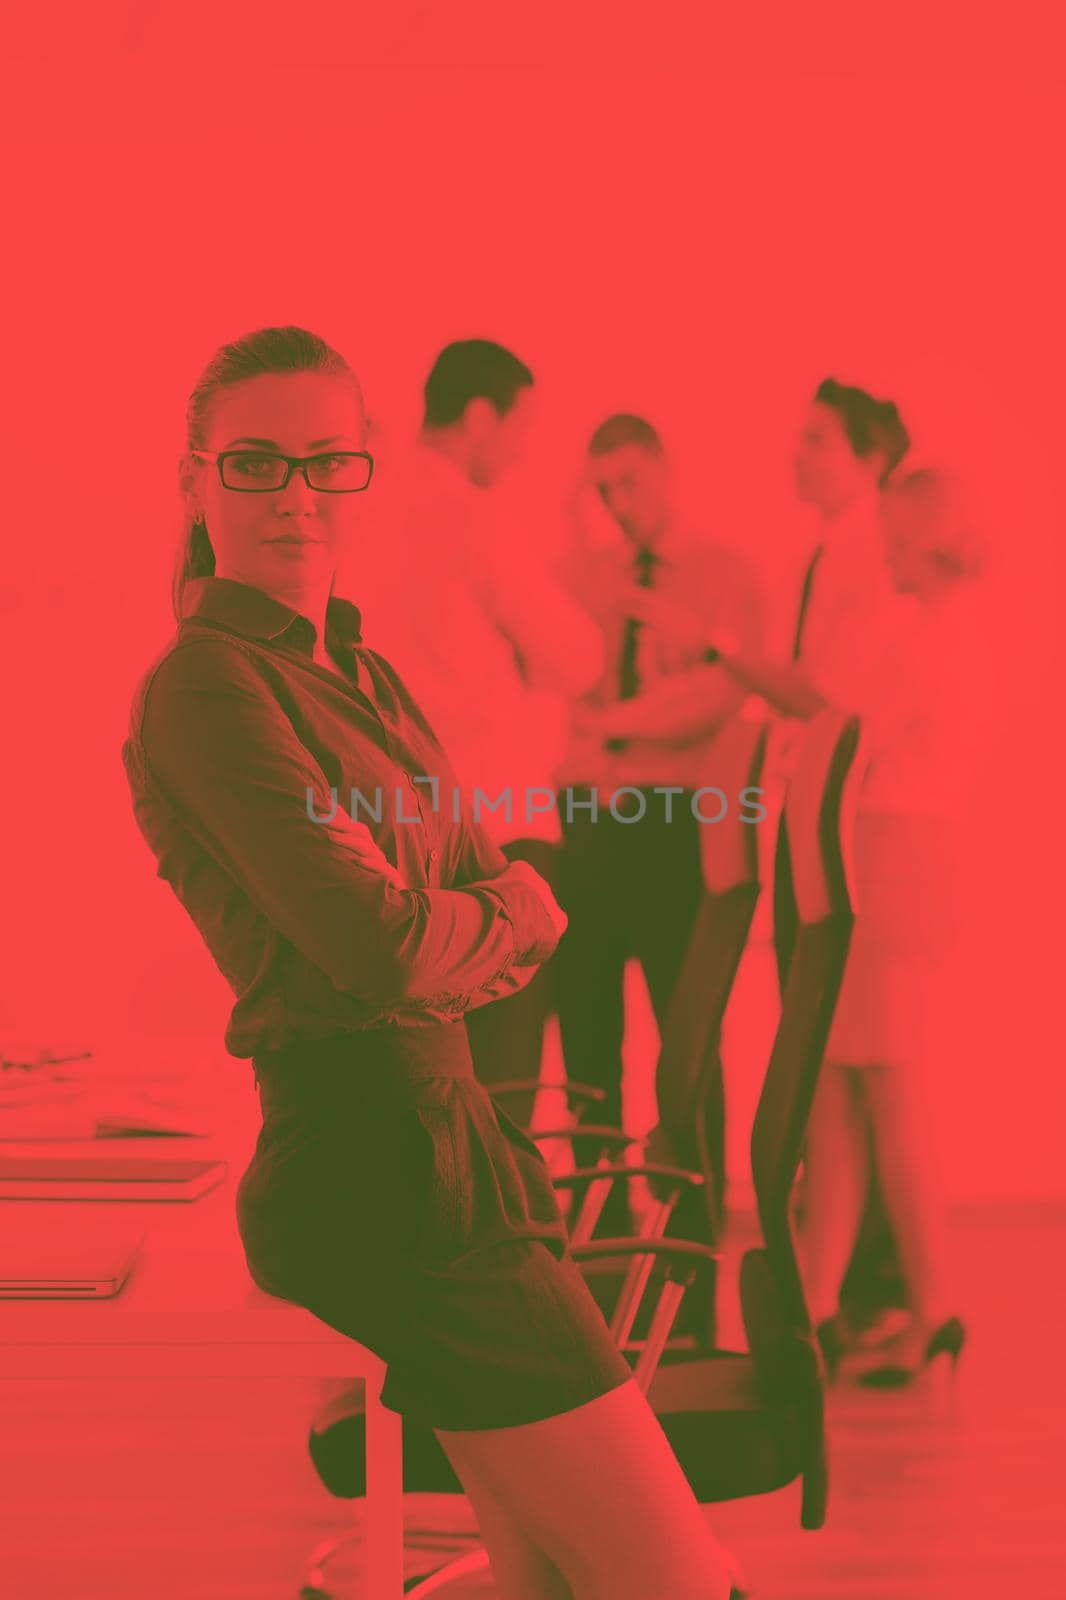 business woman standing with her staff in background by dotshock